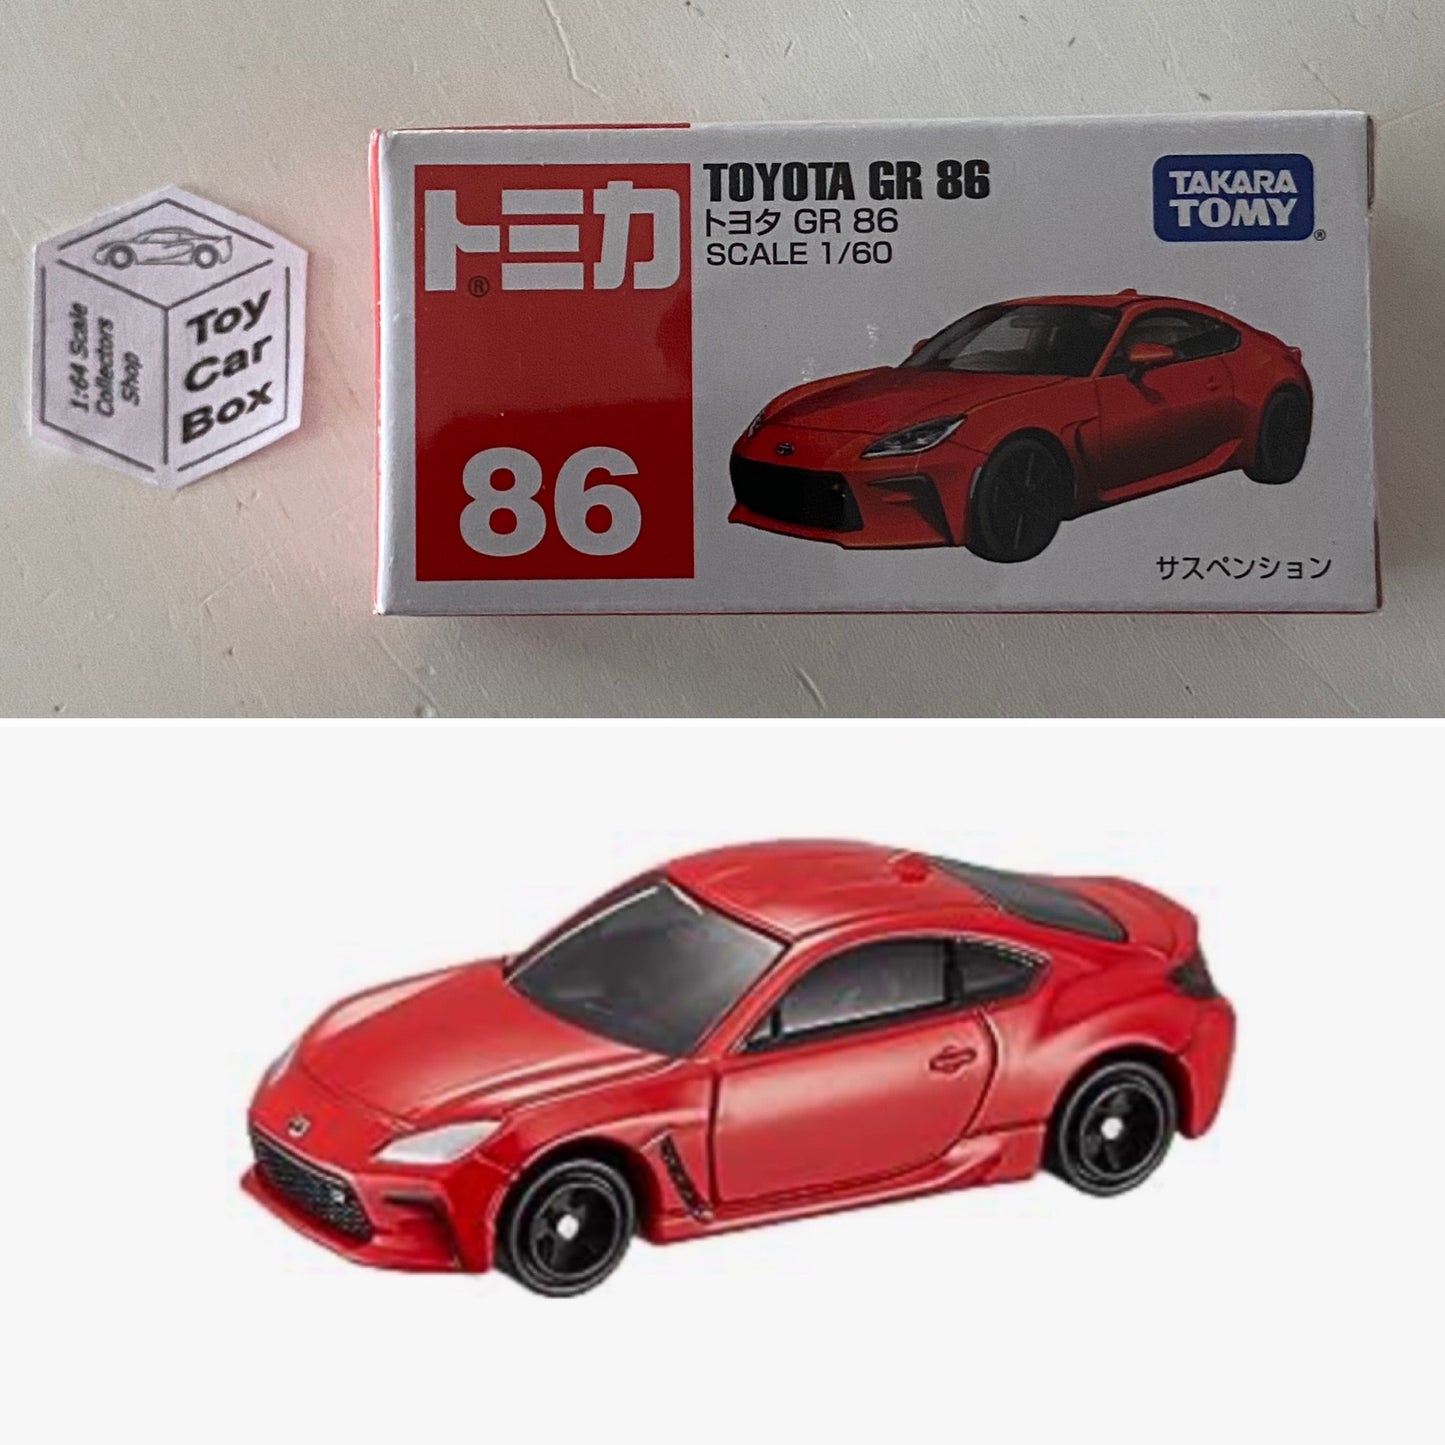 TOMICA Regular #86 - Toyota GR86 (Red - 1/60 Scale - Boxed) G07